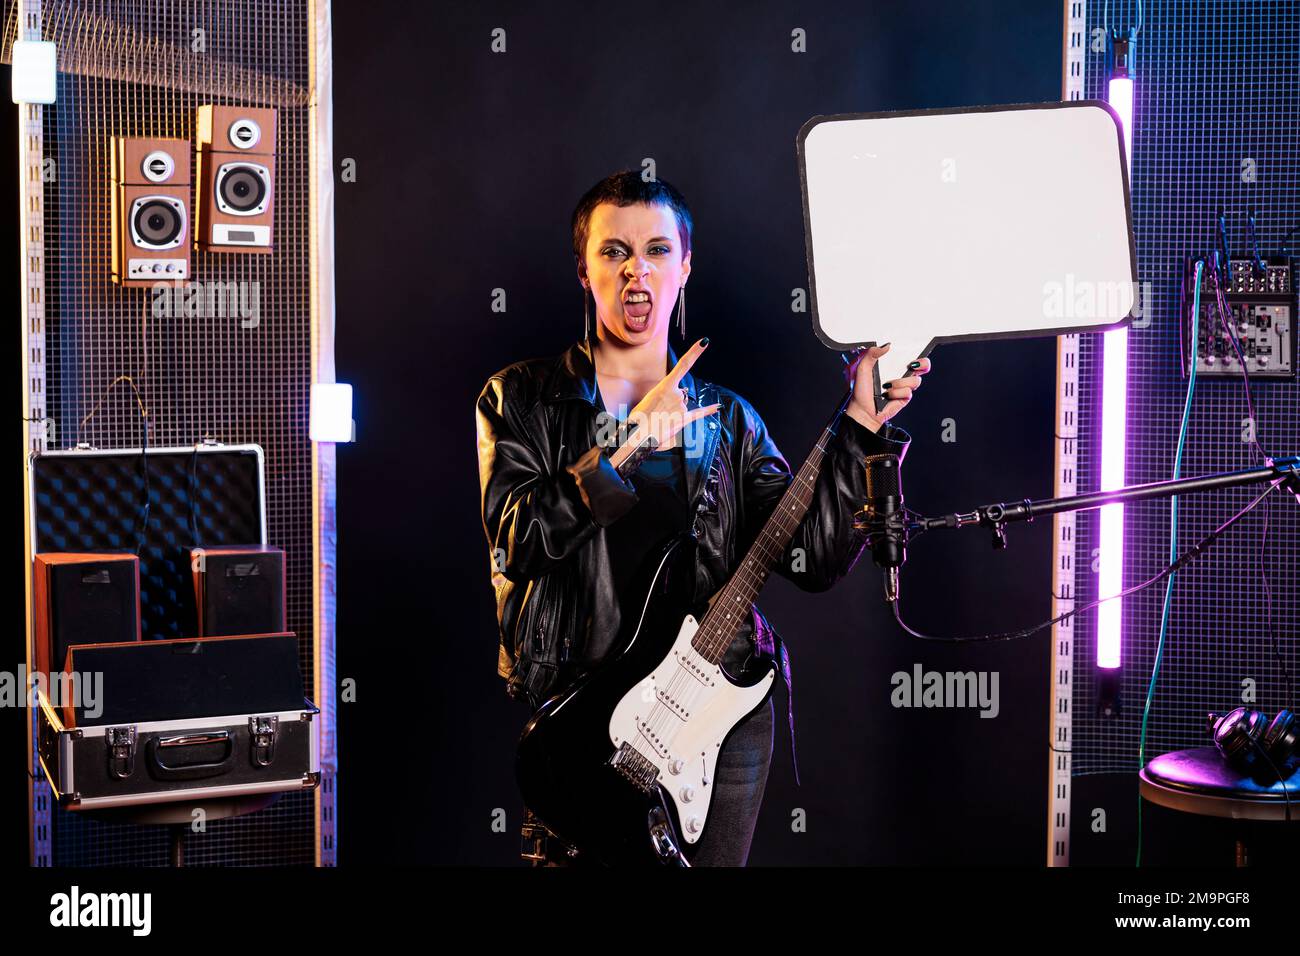 Musician showing blank placard with copy space for advertisement in music studio, person playing guitar preparing for rock concert. Rebel woman with leather outfit performing heavy metal song Stock Photo